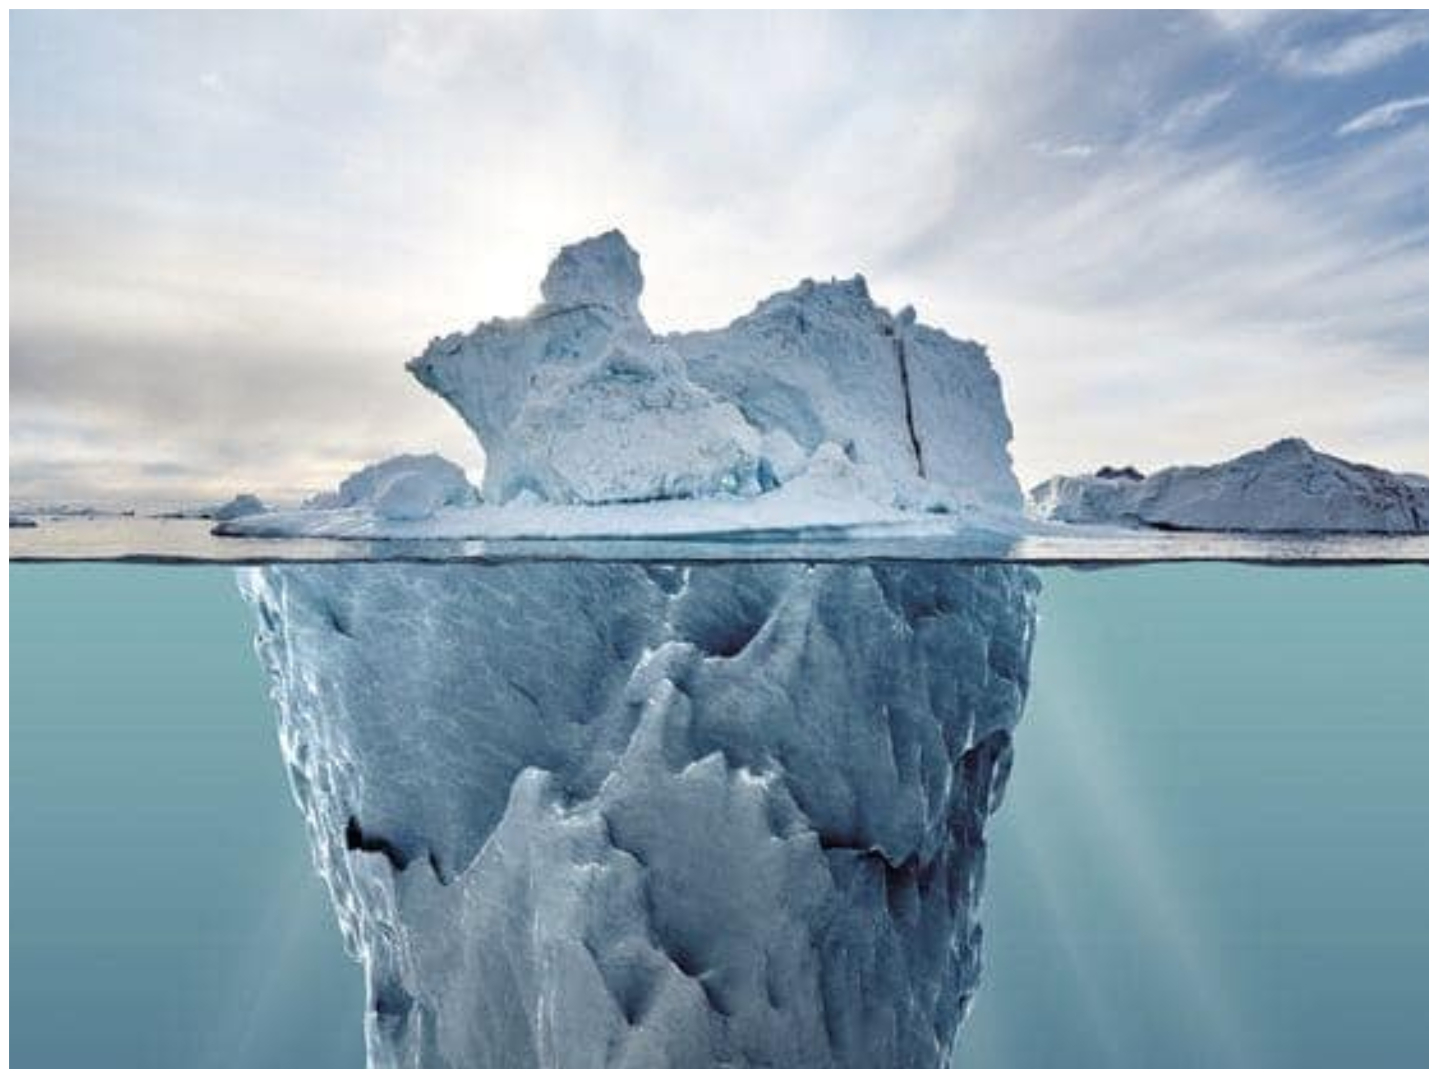 Does iceberg really float vertically?